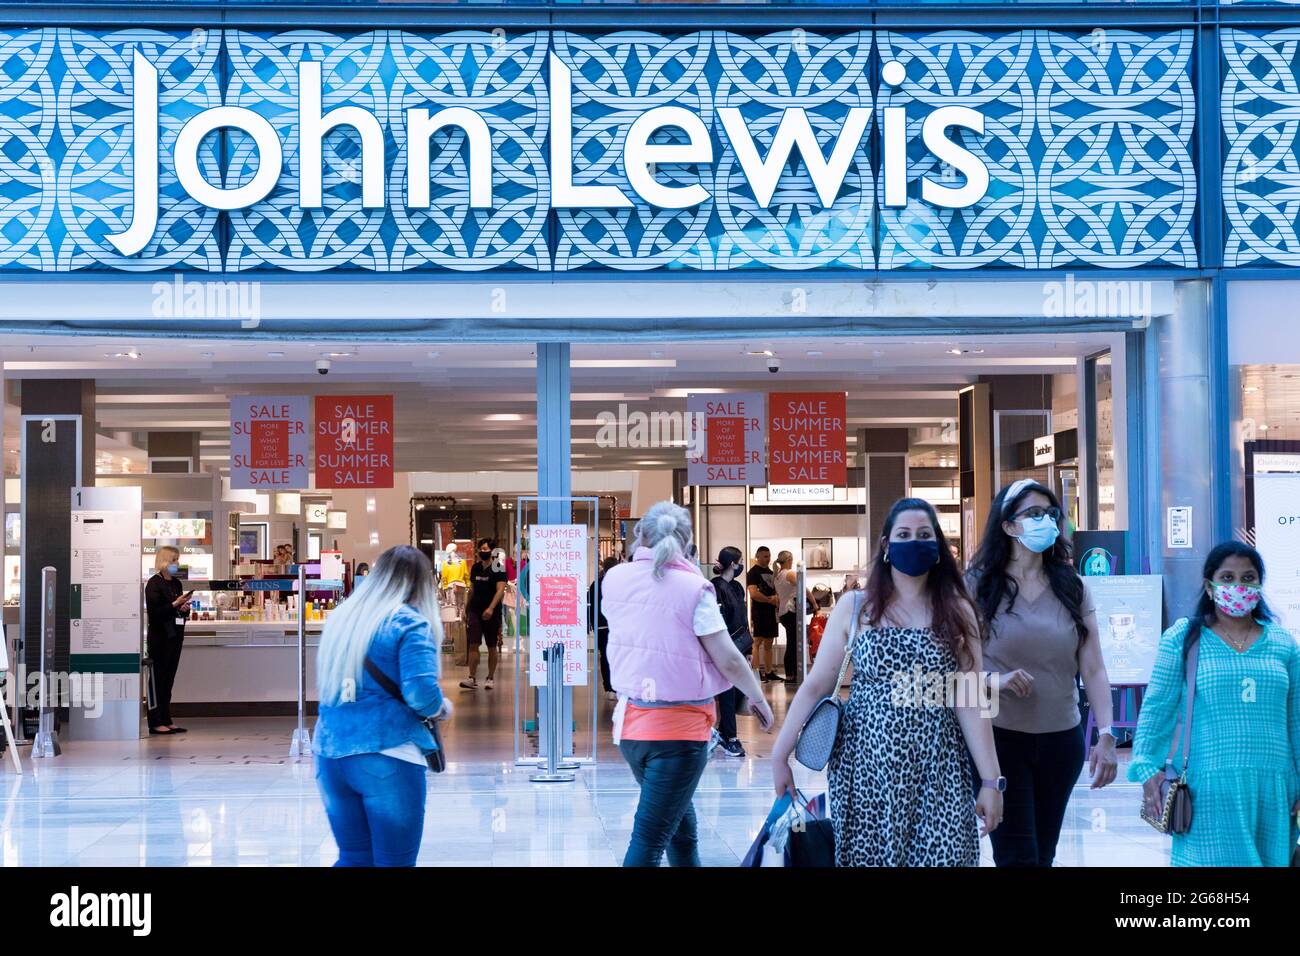 Shoppers exit John Lewis department store at Westfield shopping centre London, England, UK during summer sale Stock Photo